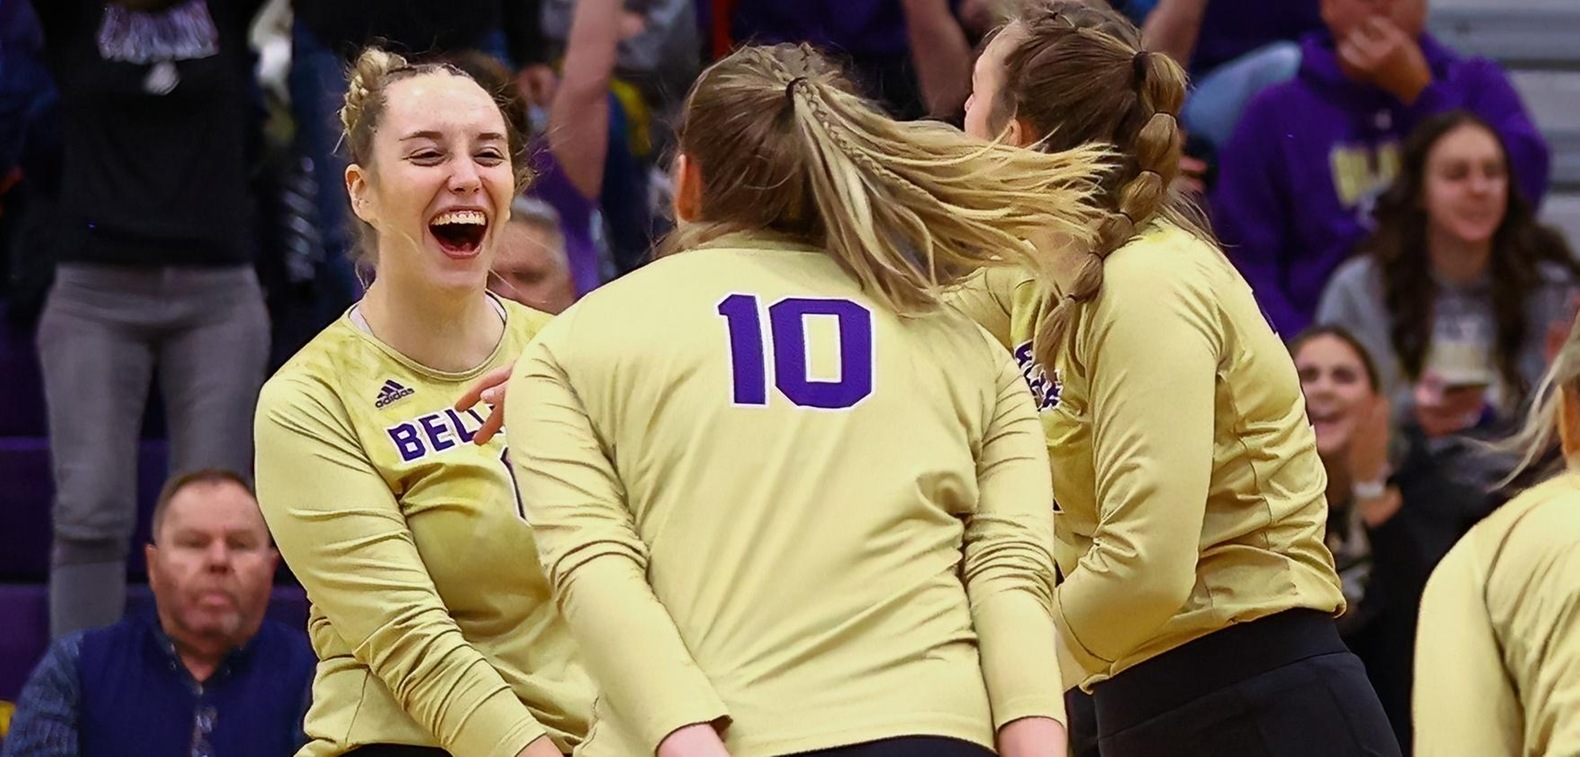 Bruins punch ticket to Sioux City with sweep over JBU